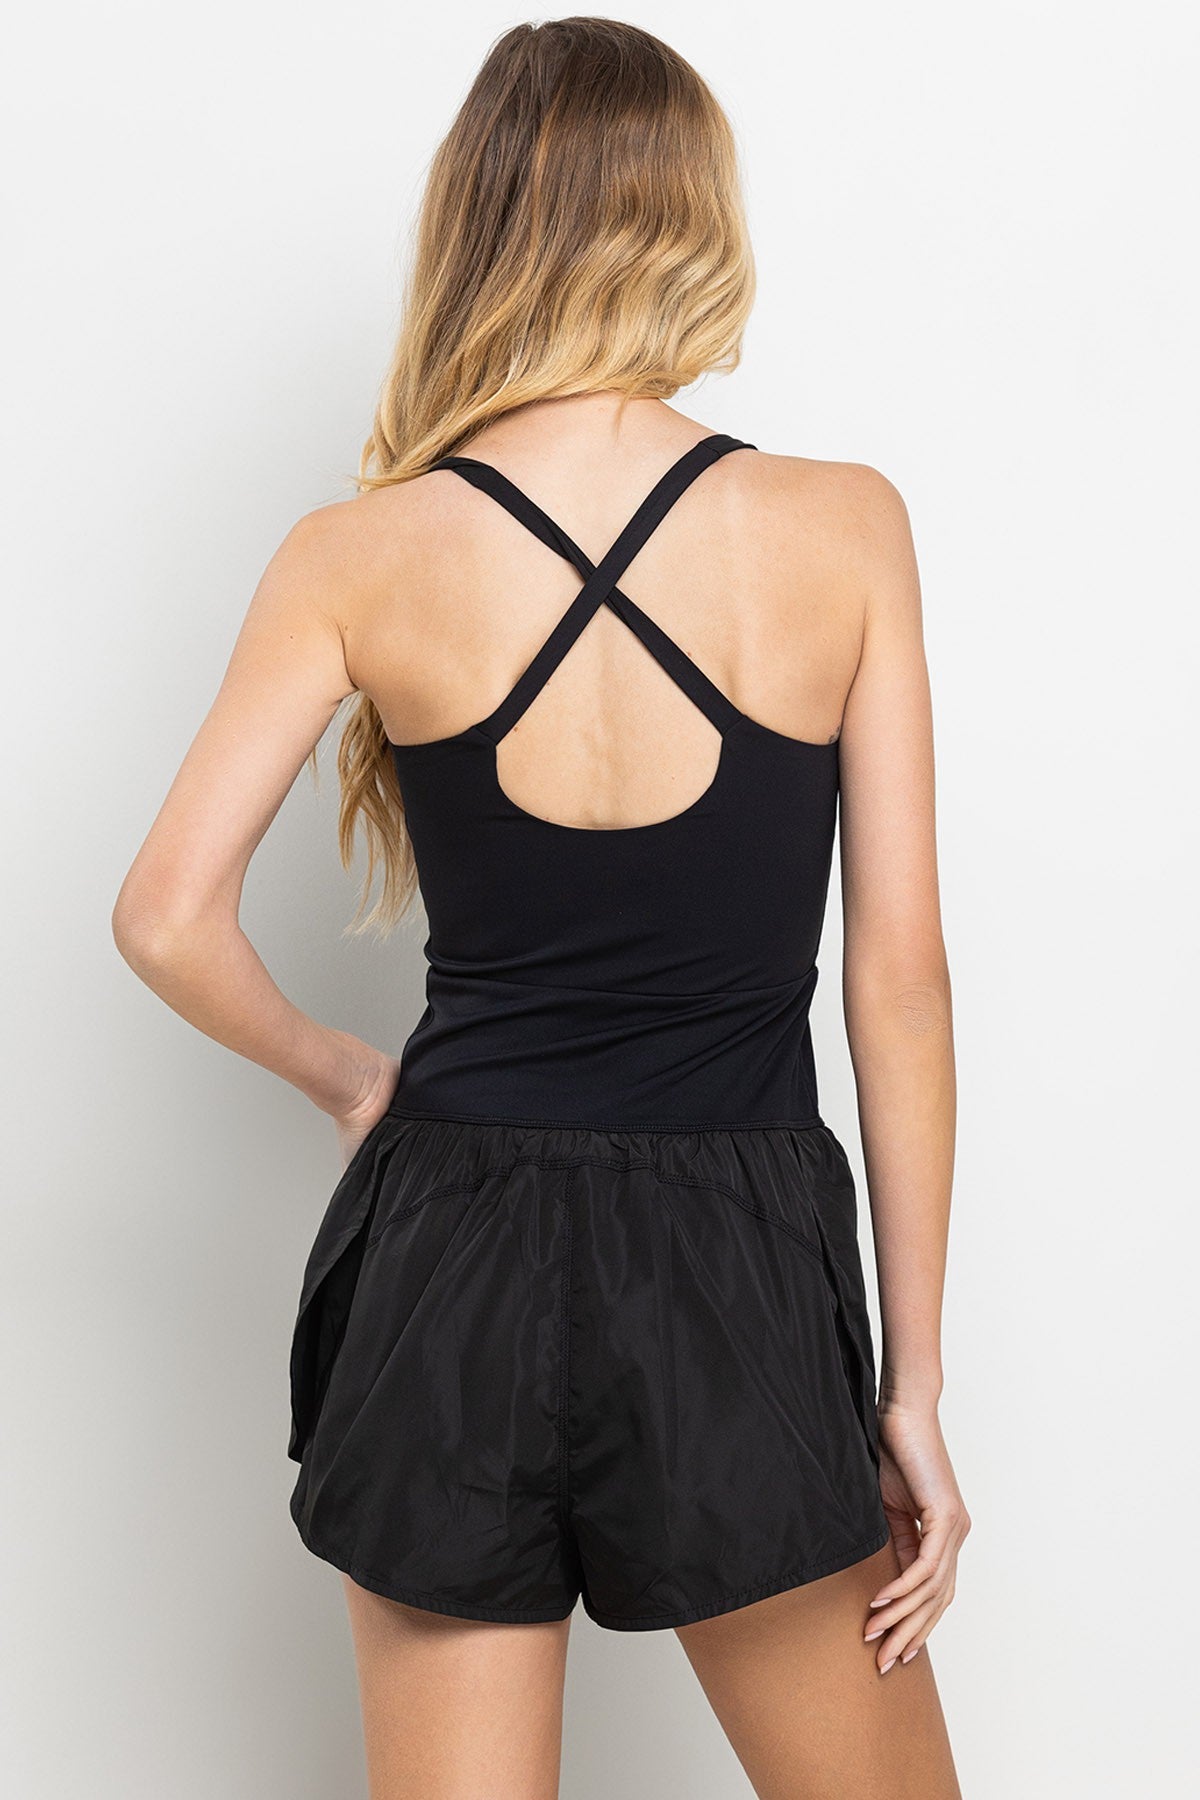 Black romper with elastic waistband, and small center cutout detail. 